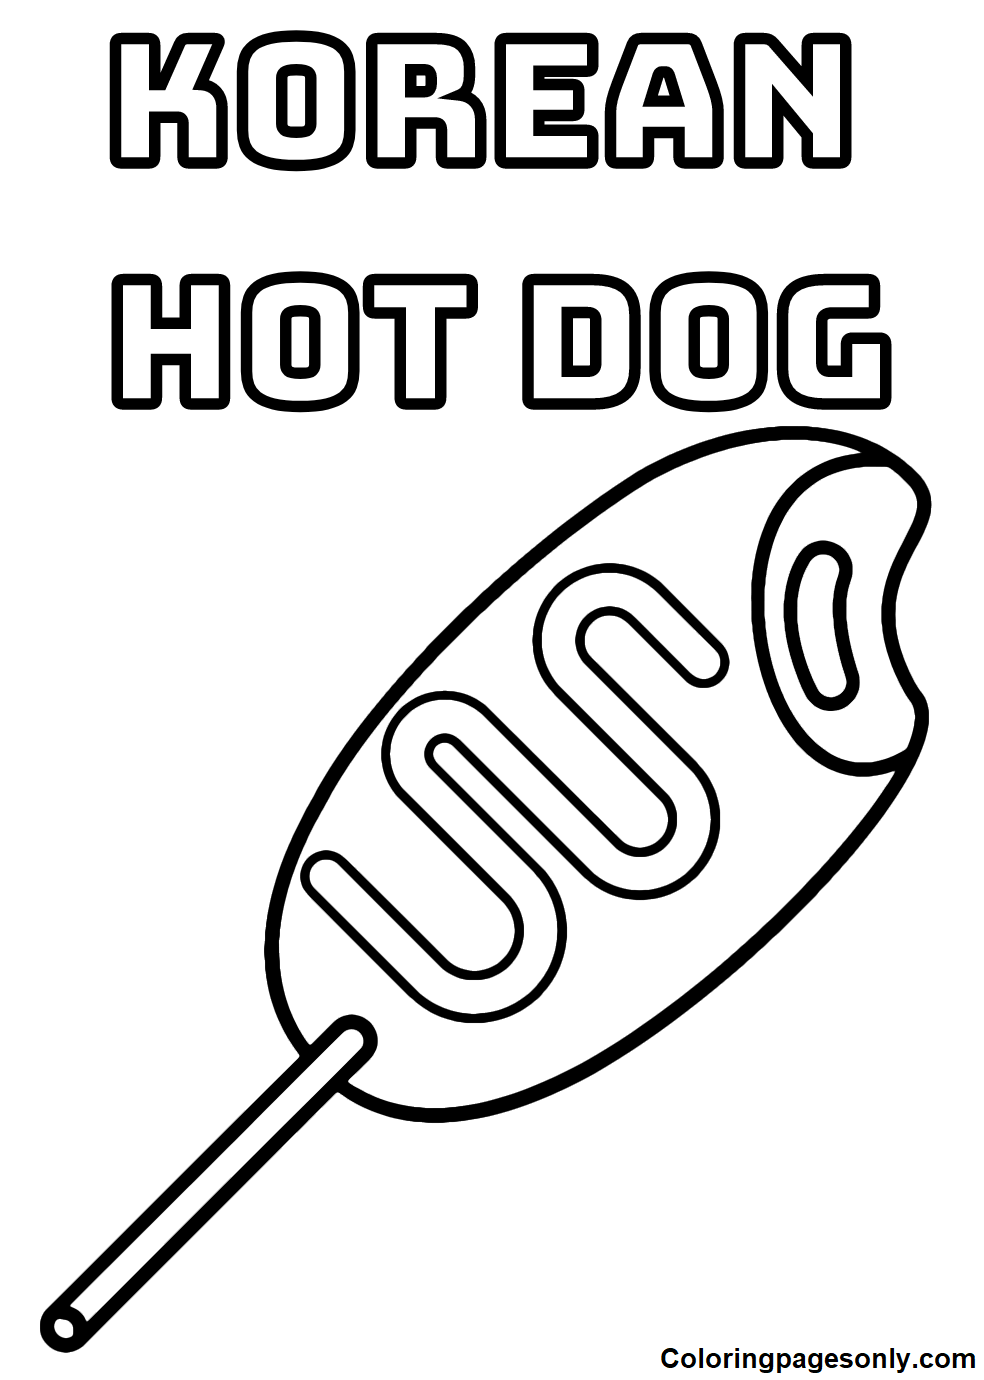 Korean Hot Dog Coloring Pages